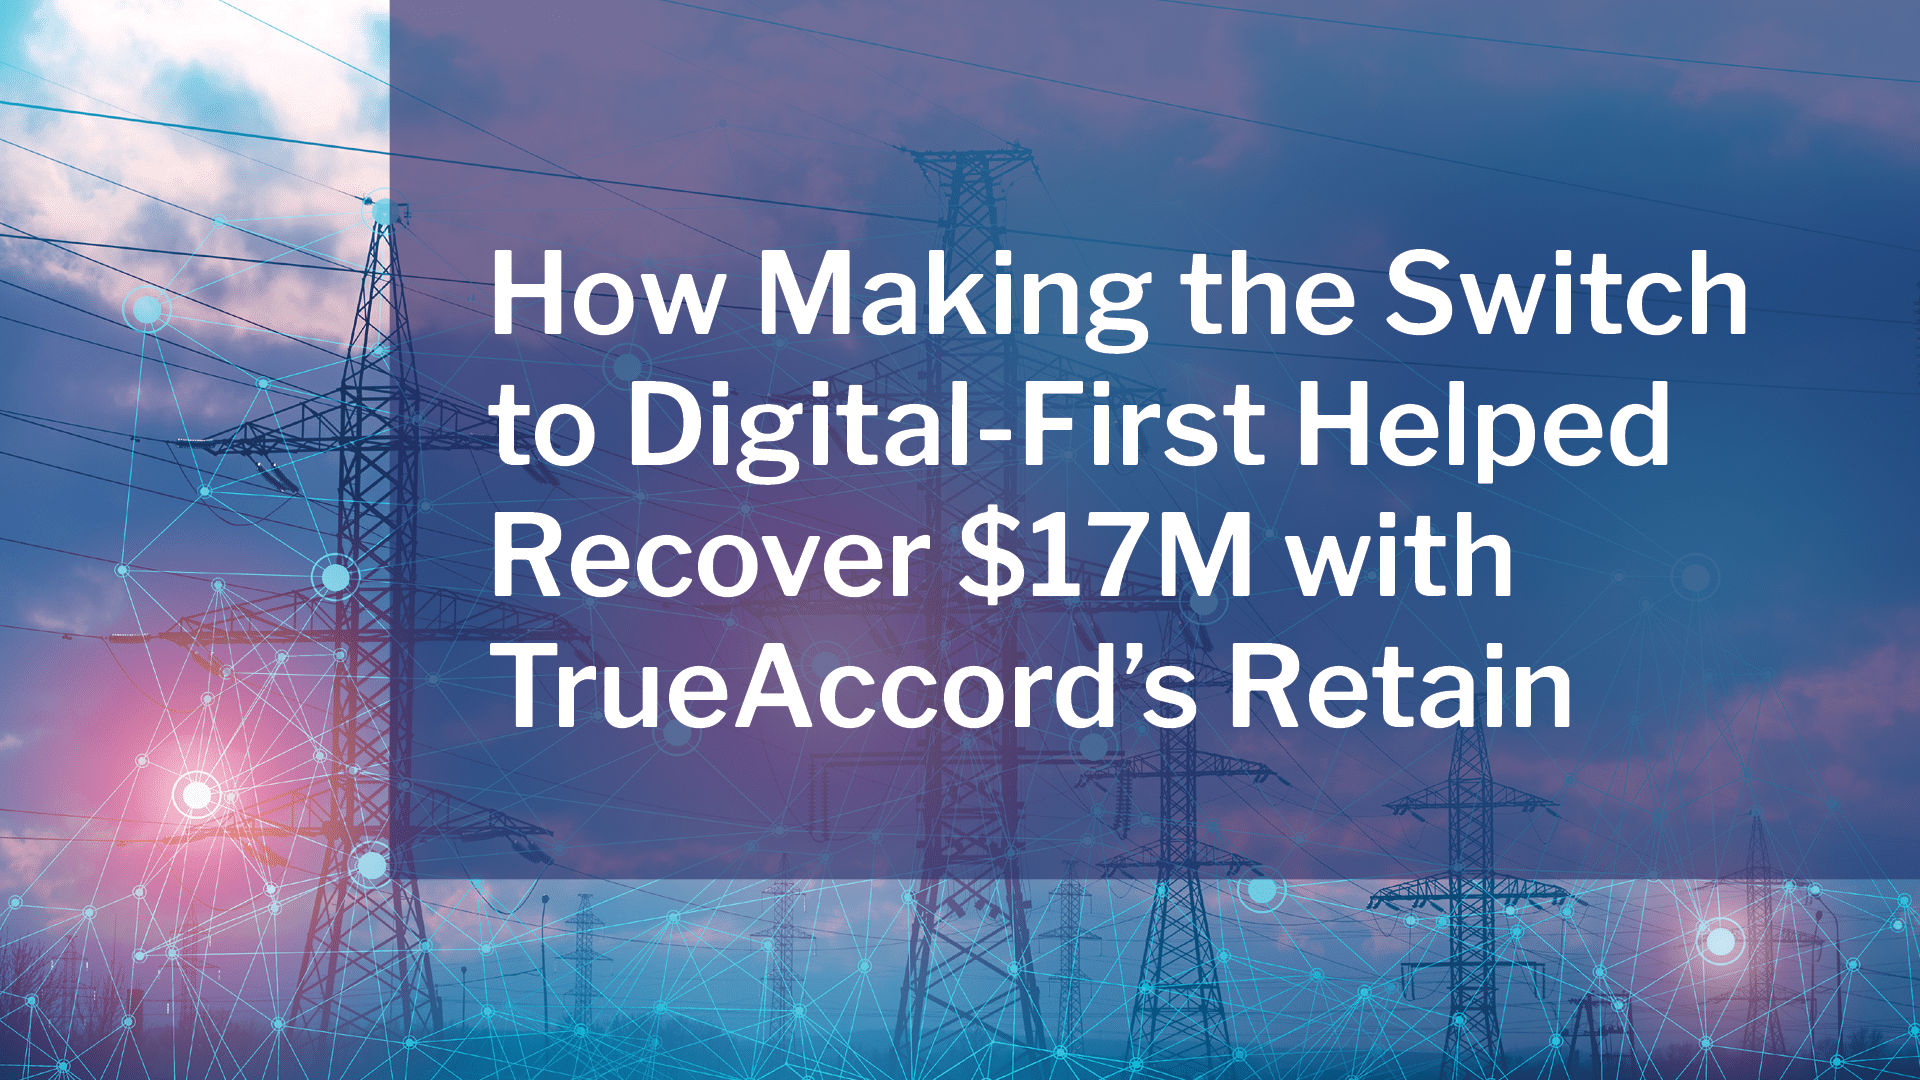 How Making the Switch to Digital-First Helped Recover $17M with TrueAccord's Retain